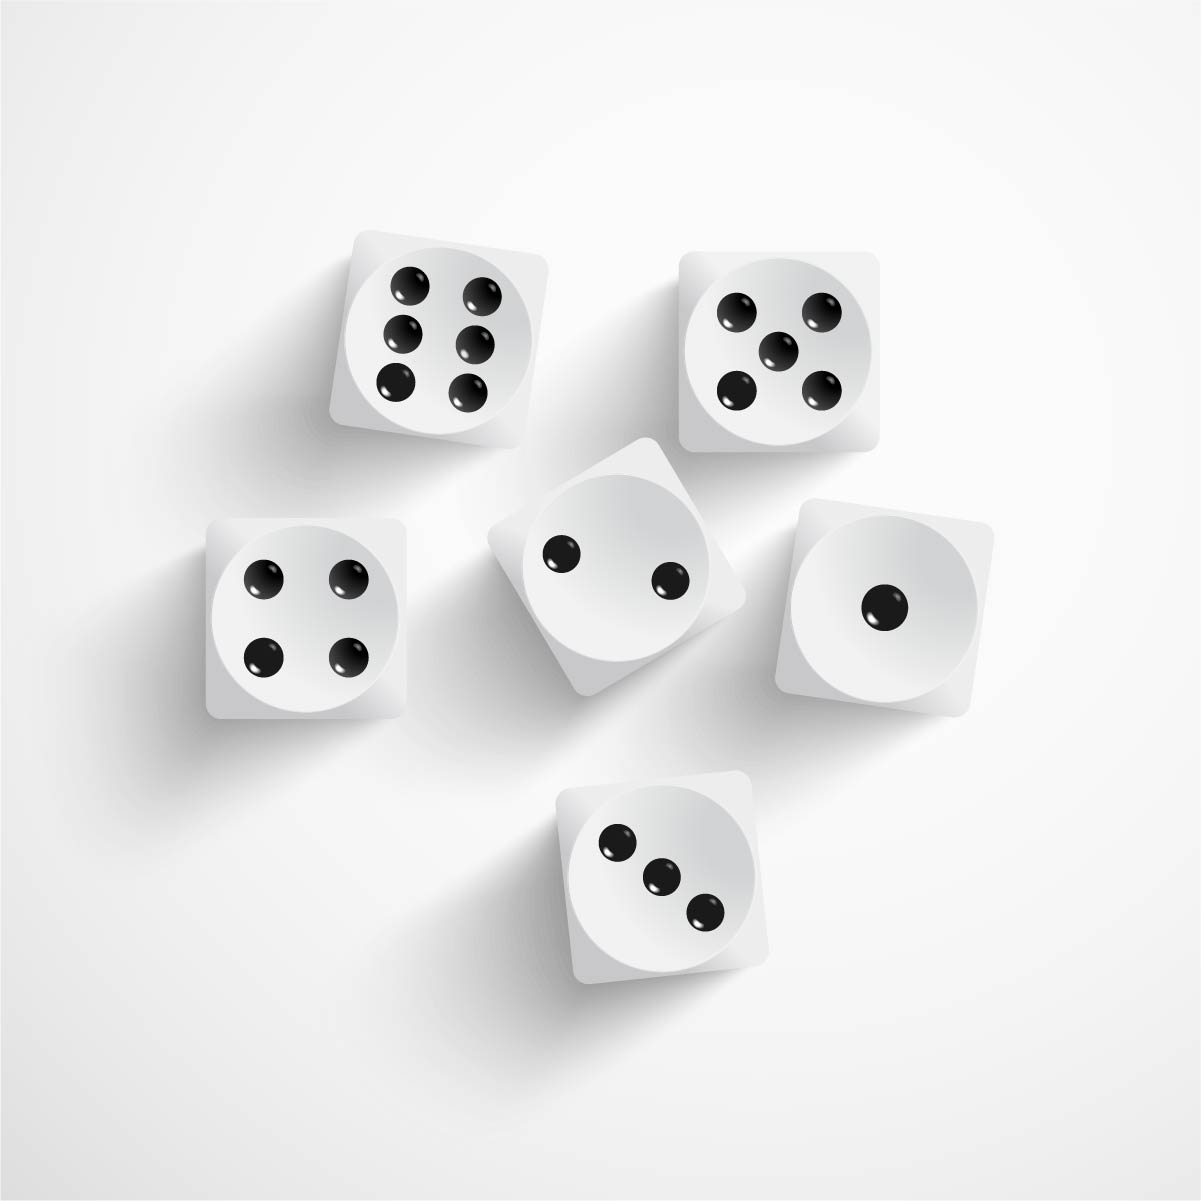 Thus photo has multiple playing dice that correlate with the evidence available for the existence of ESP.